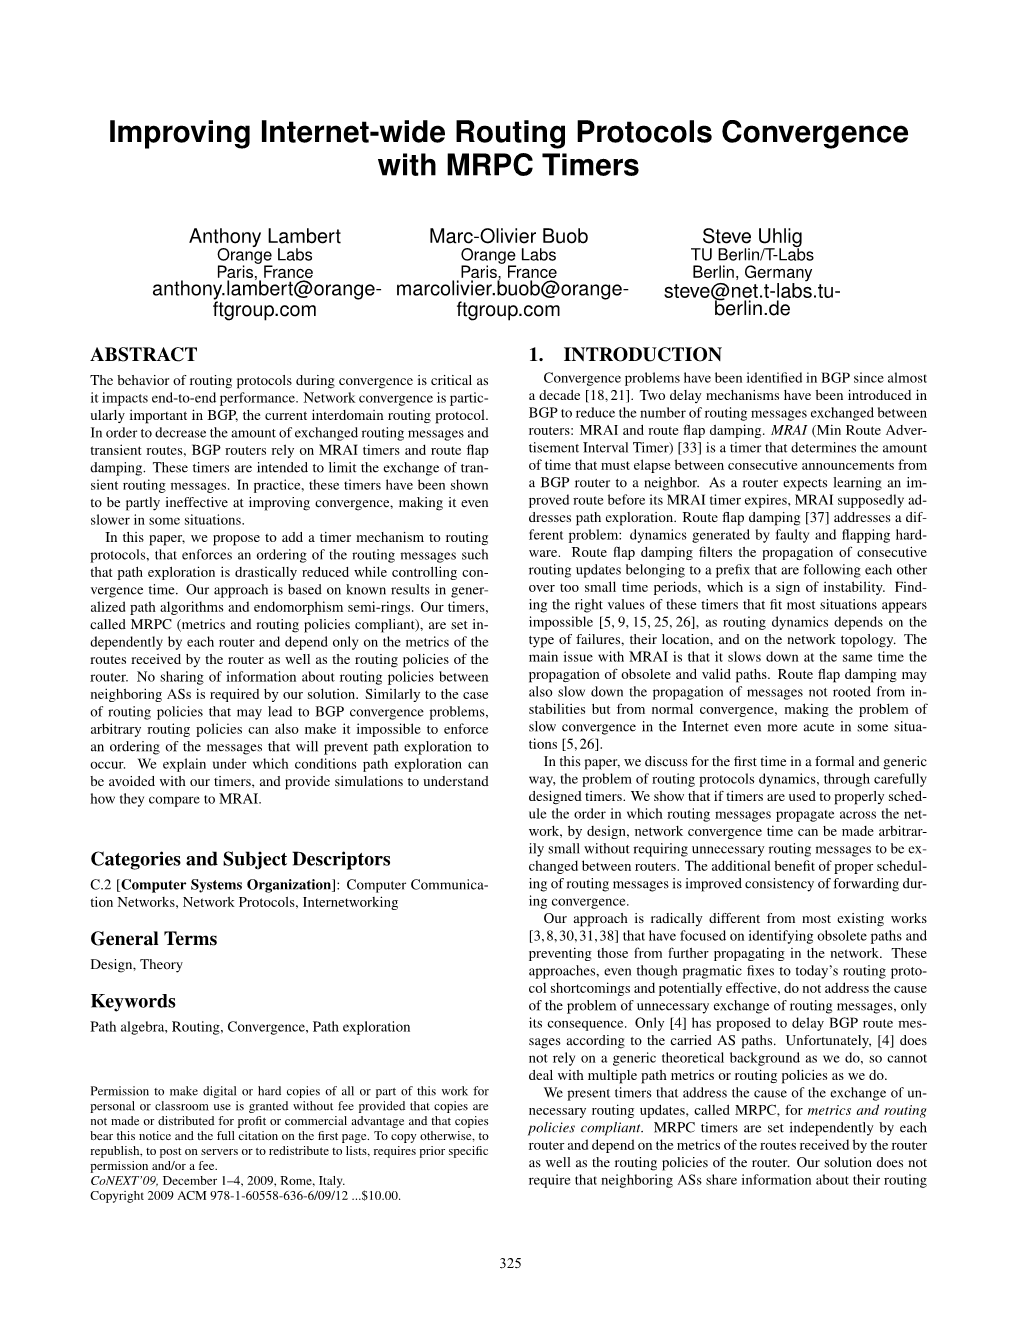 Improving Internet-Wide Routing Protocols Convergence with MRPC Timers